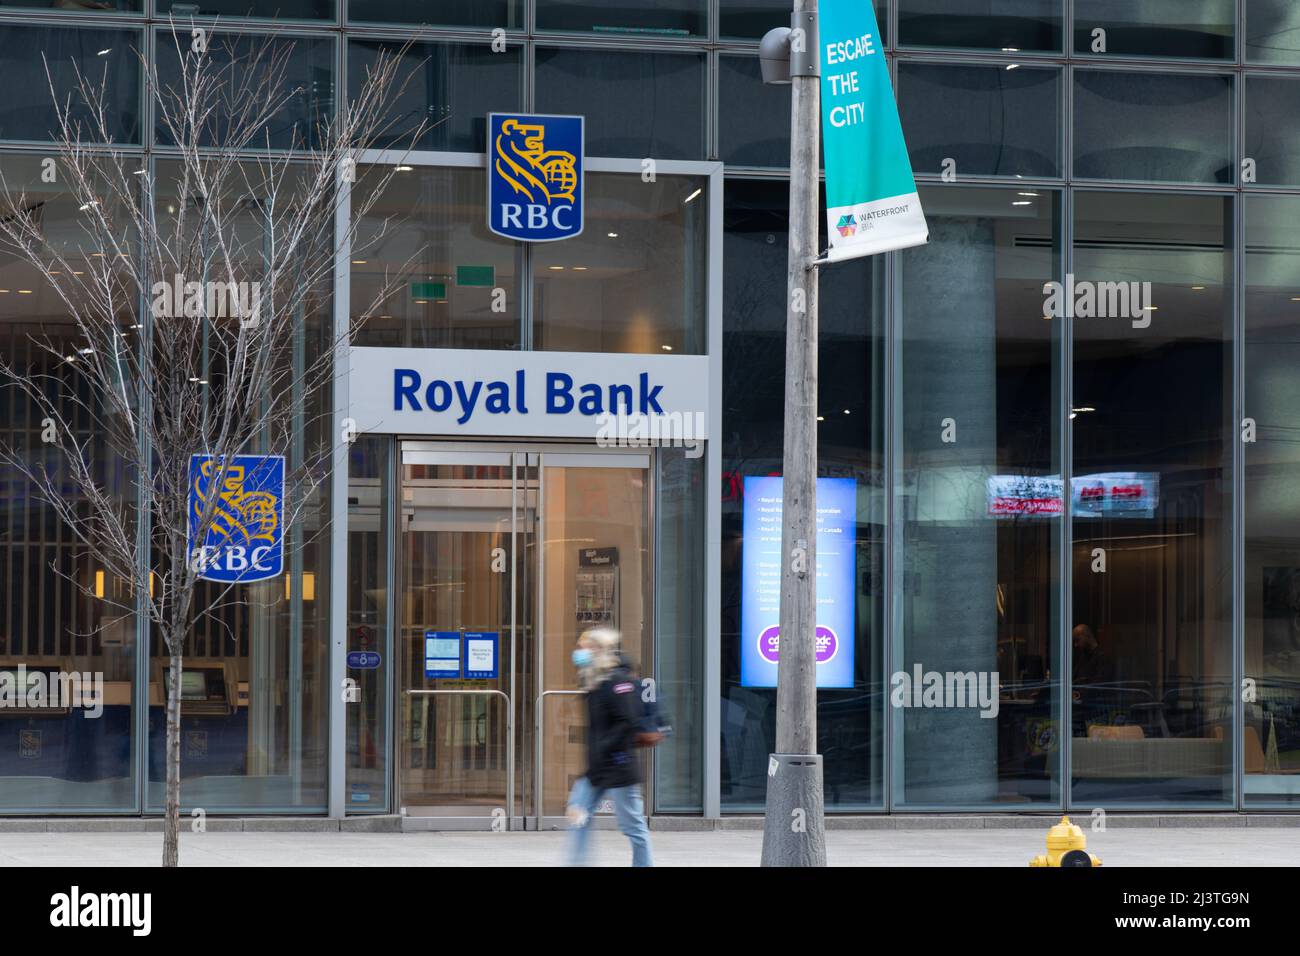 The front of an RBC (Royal Bank of Canada) bank branch in downtown Toronto. Stock Photo